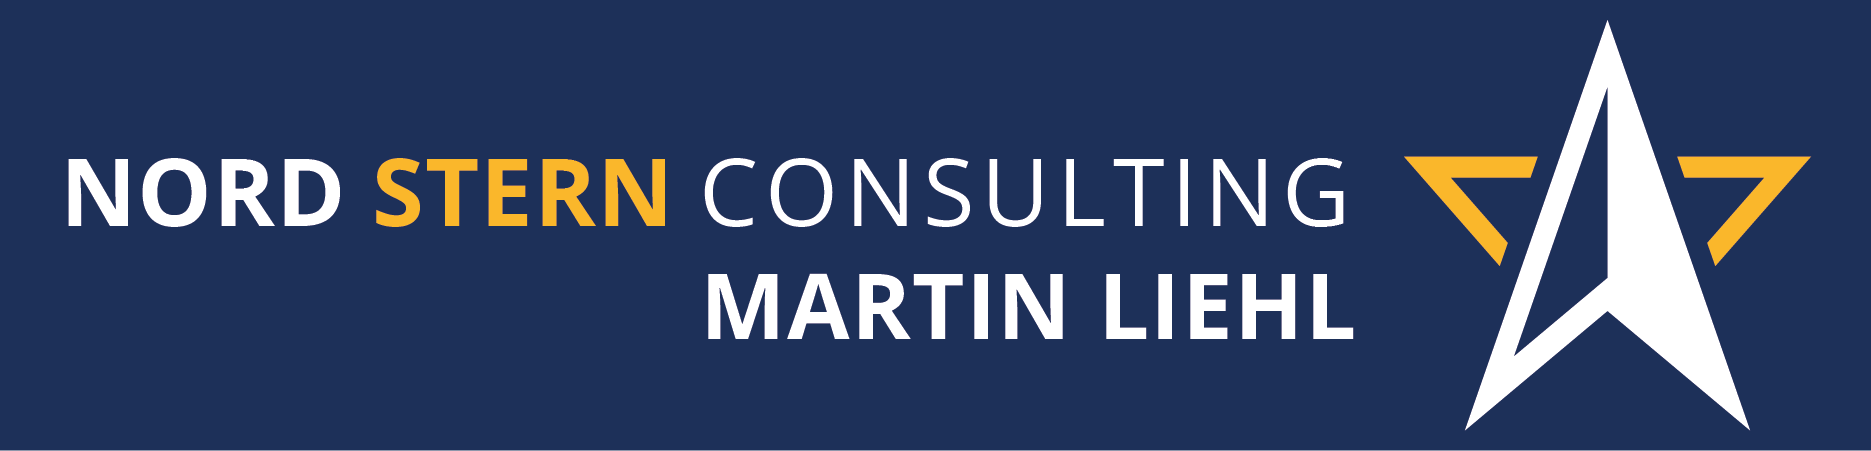 Nordstern Consulting - Martin Liehl